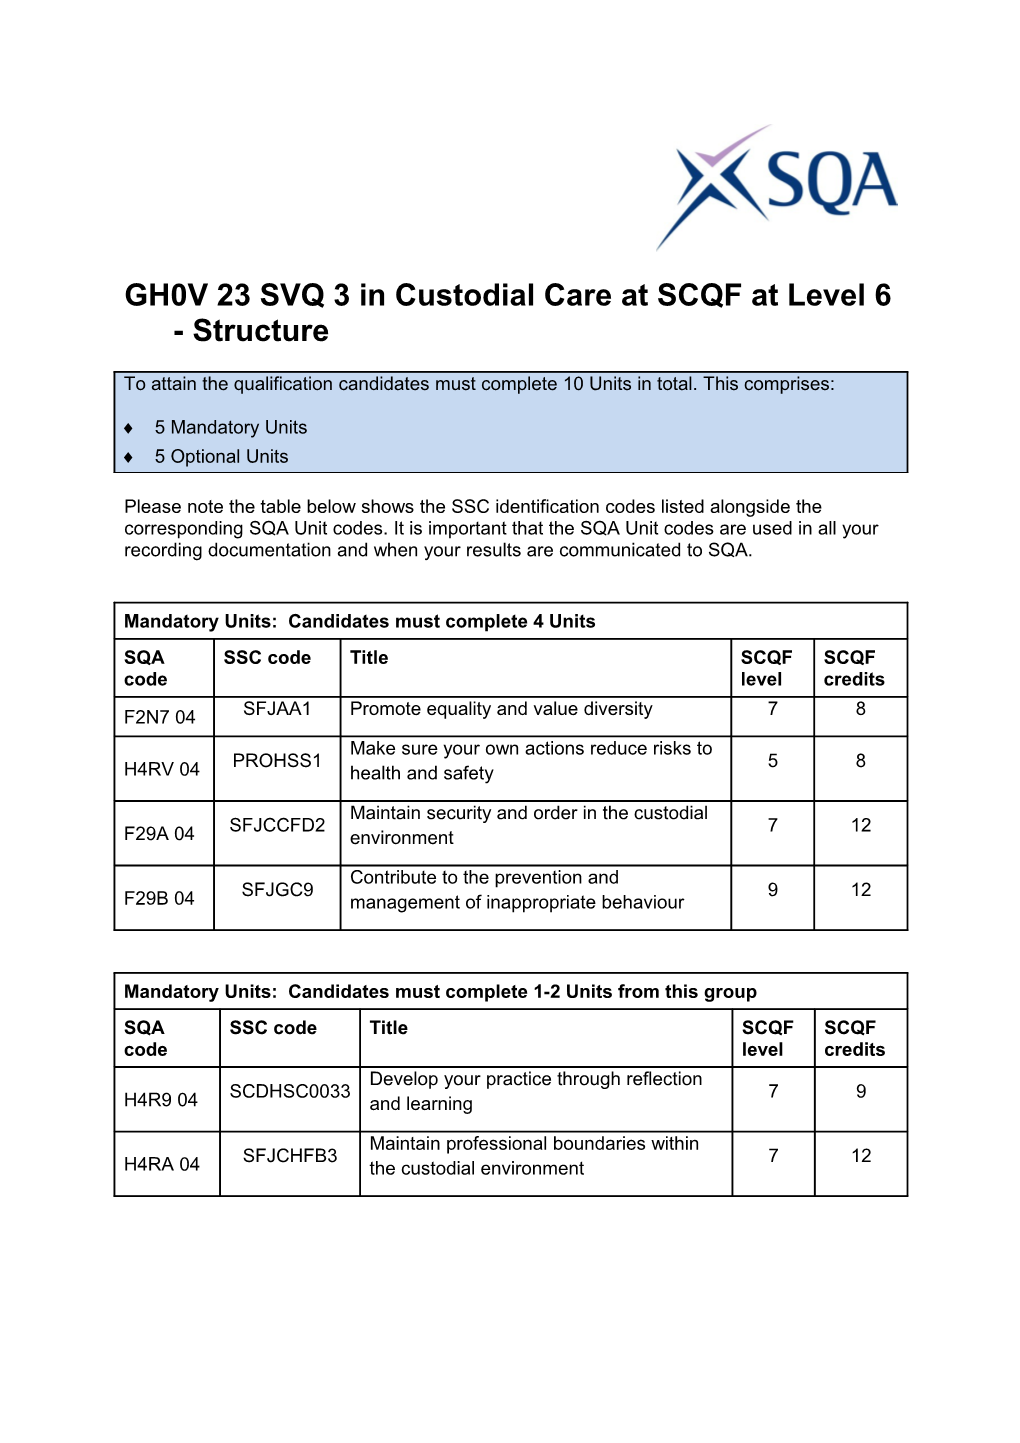 GH0V23 SVQ 3 in Custodial Care at SCQF at Level 6 - Structure